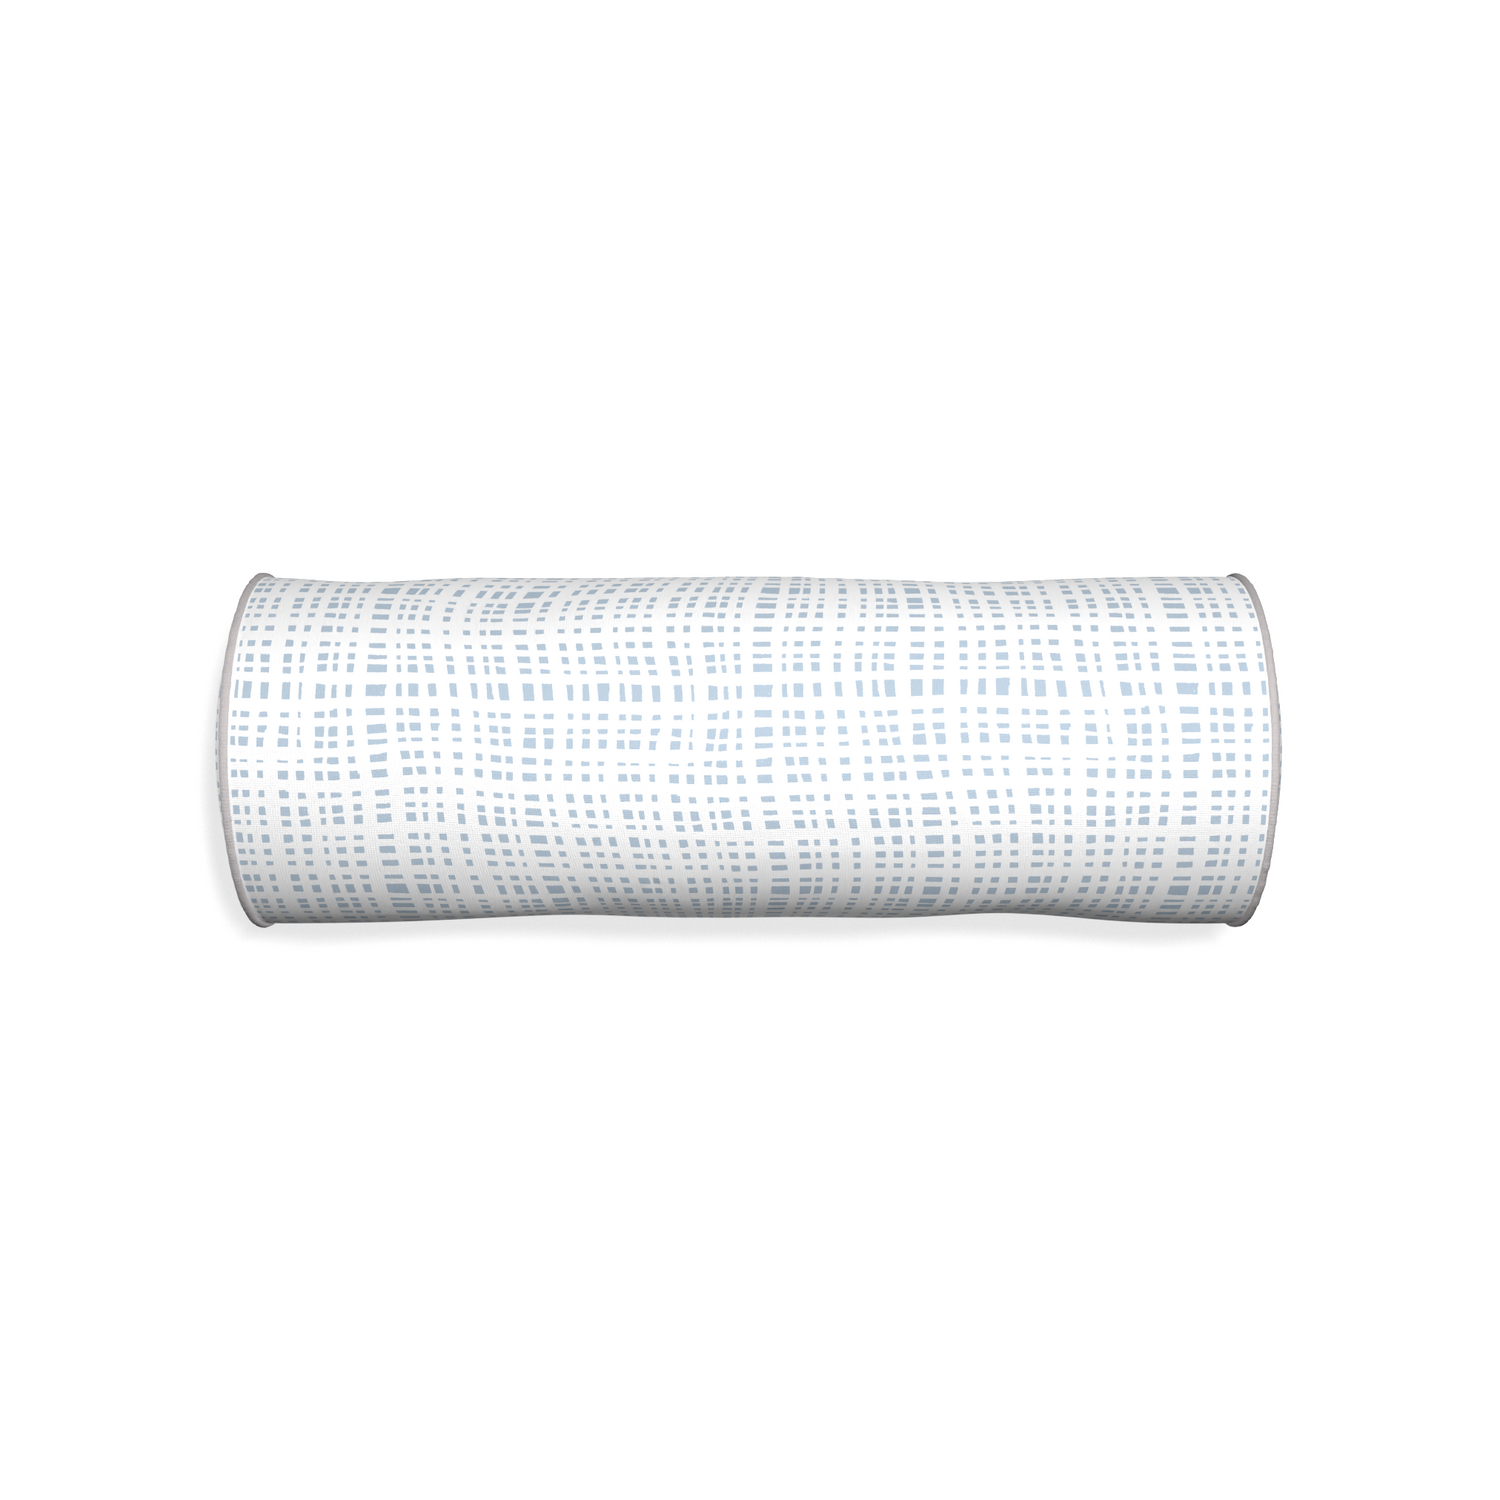 Bolster ginger sky custom plaid sky bluepillow with pebble piping on white background